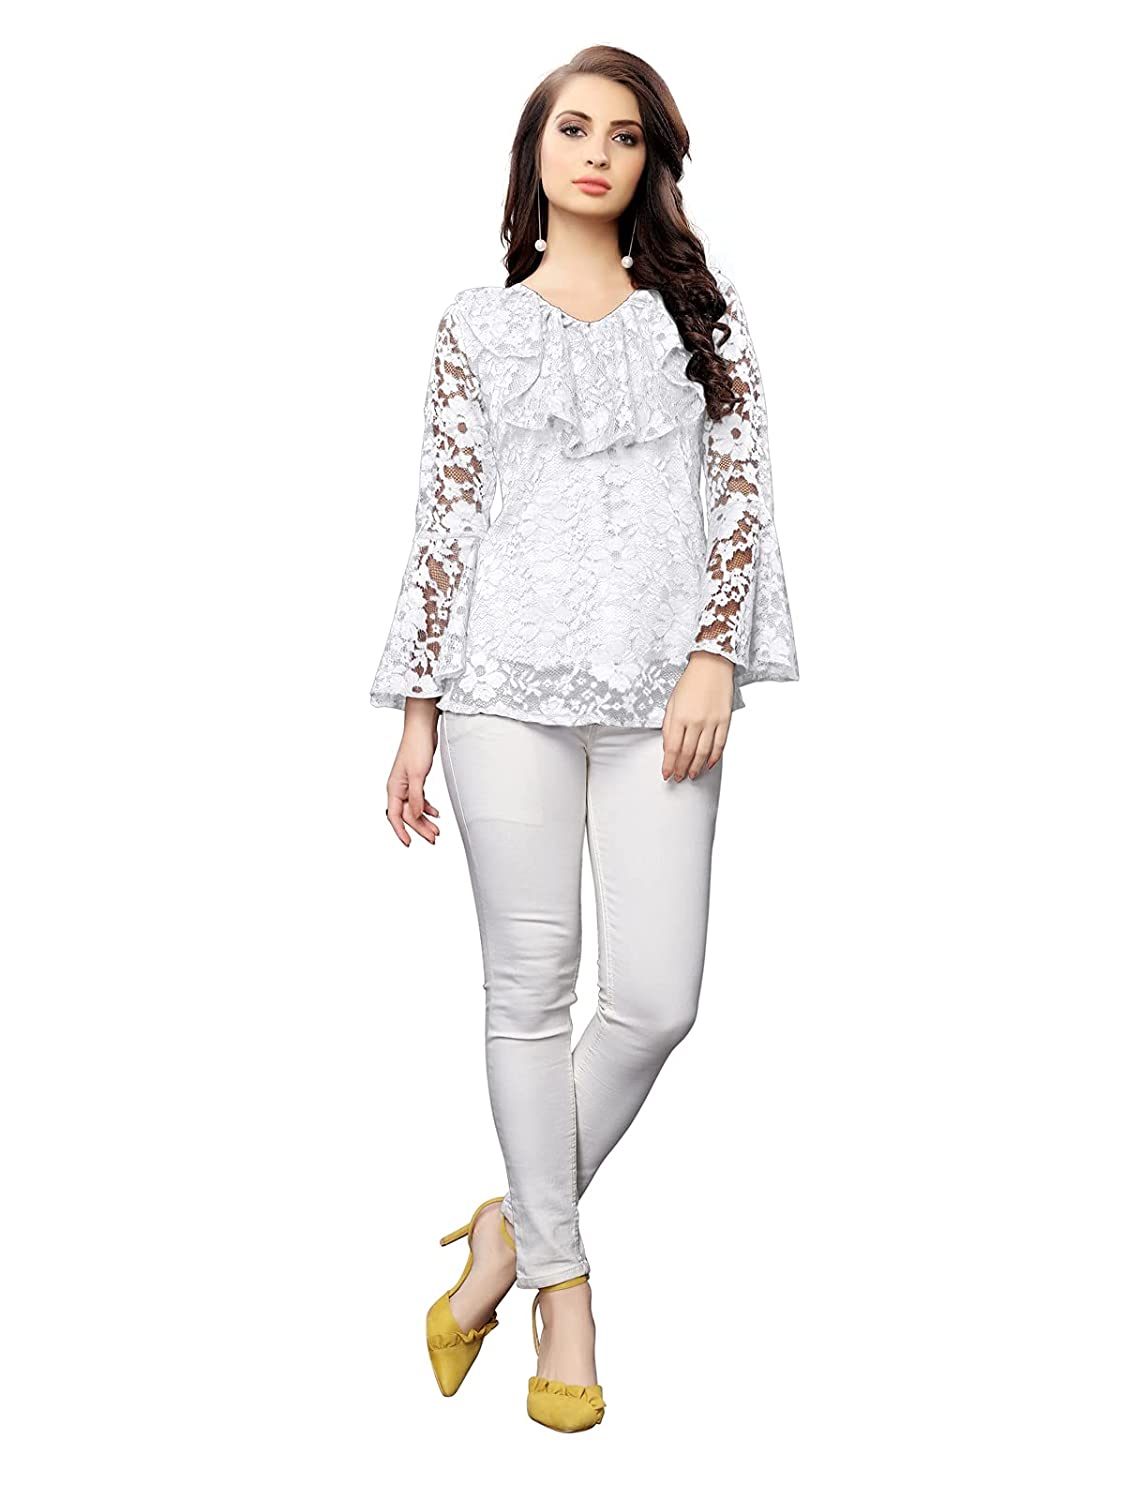 SIRIL Women's Russel Net Top -  dresses in Sri Lanka from Arcade Online Shopping - Just Rs. 4699!